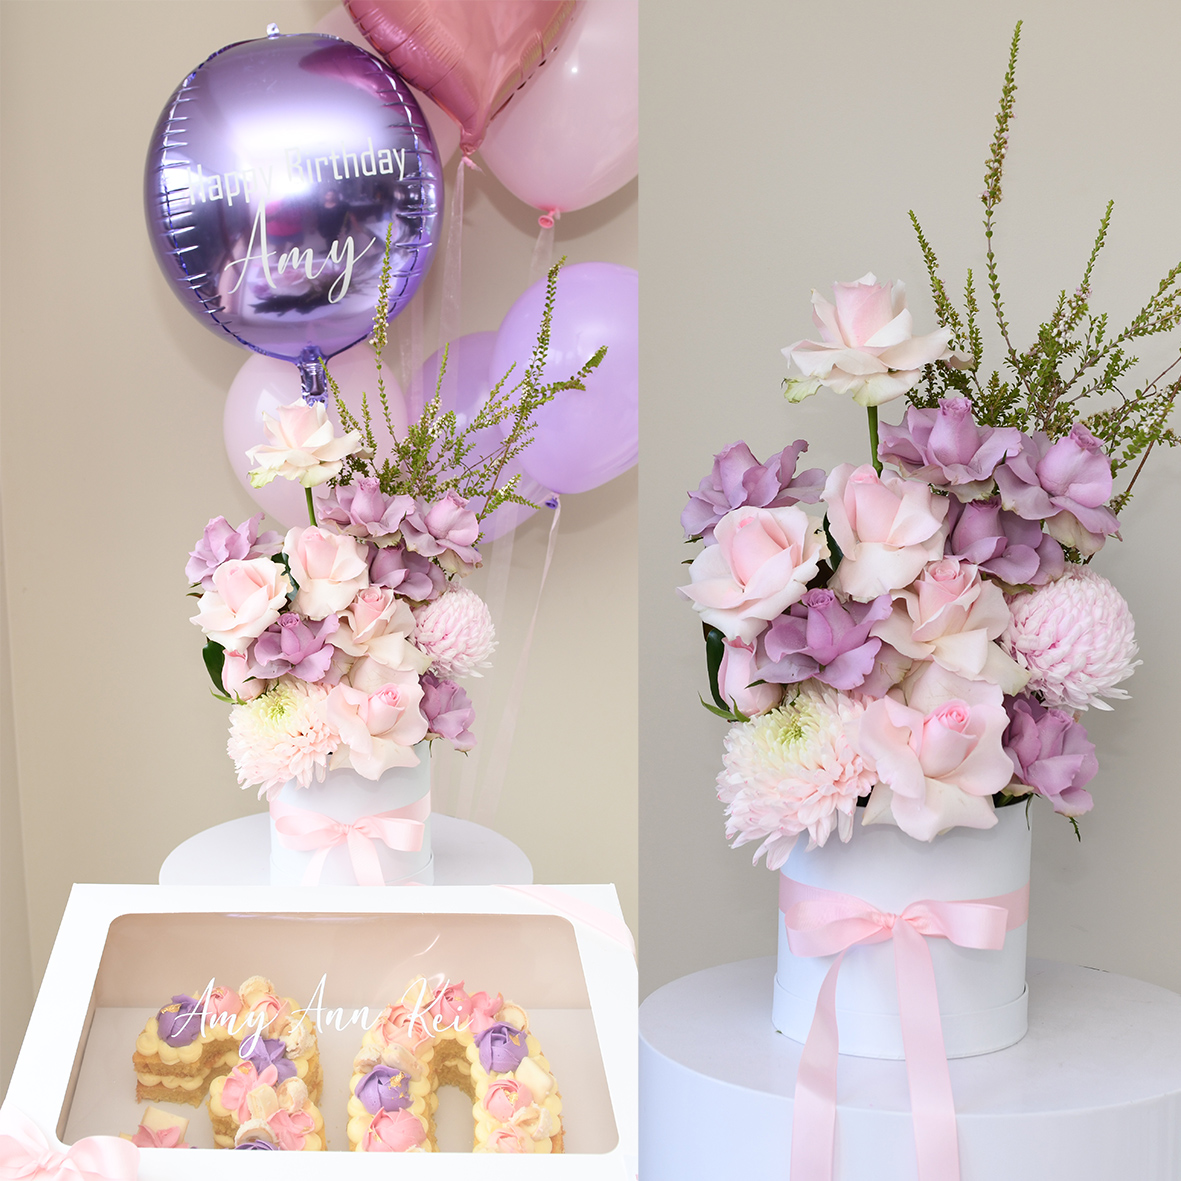 Cakes and Flowers Delivery  Sydney - WOWGIFTS 02